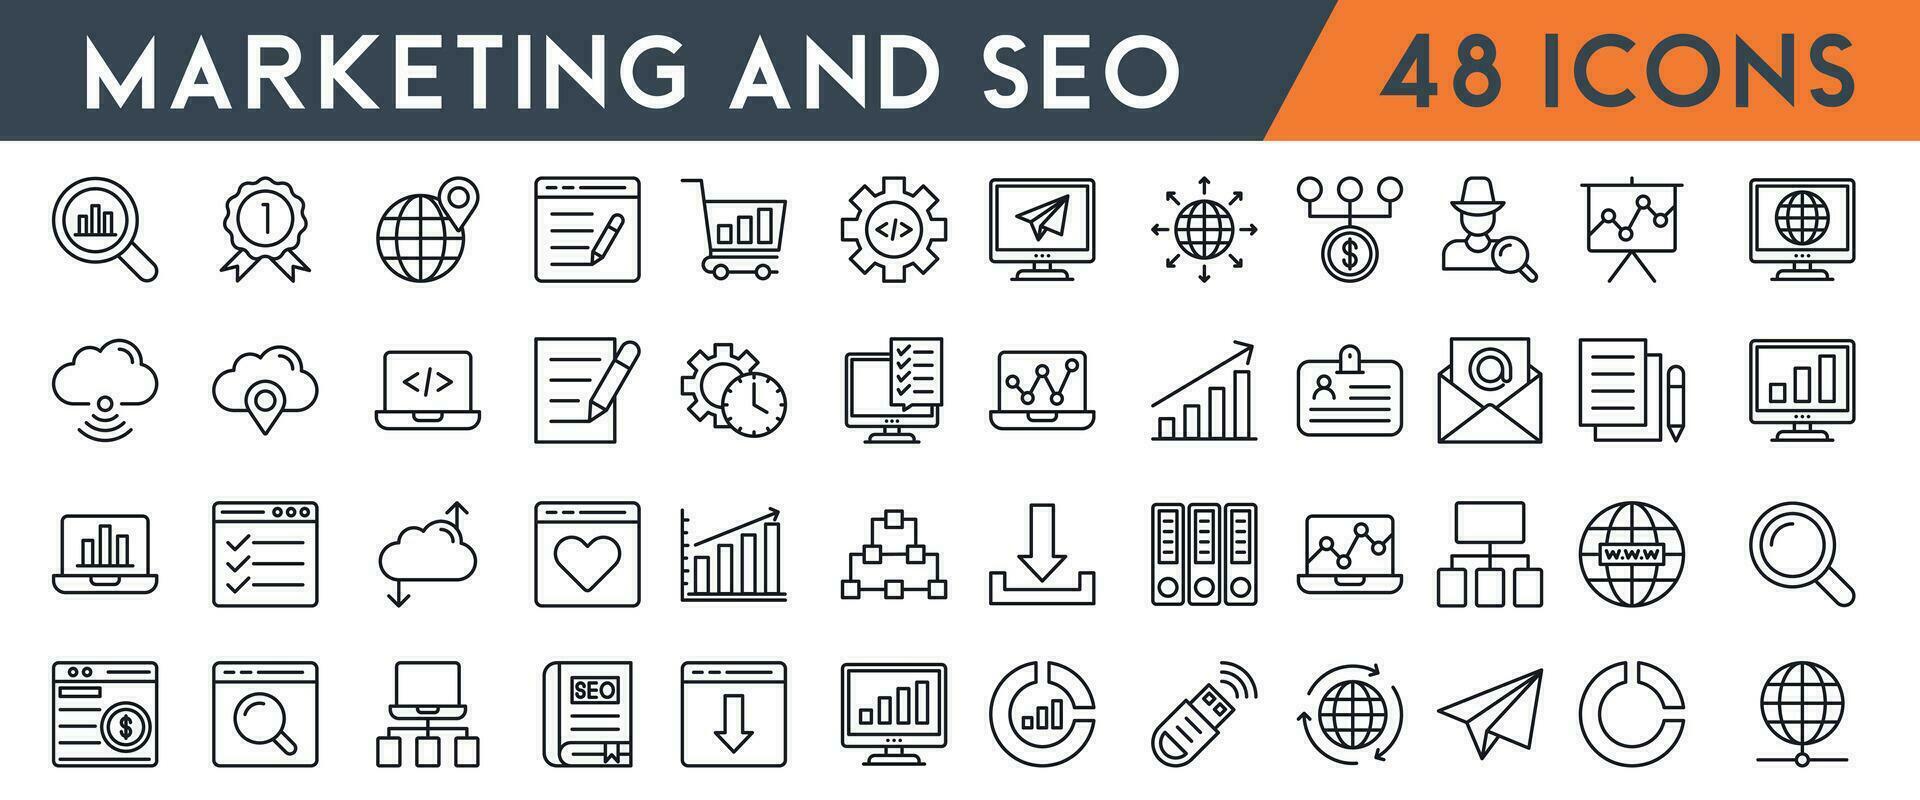 Marketing and seo thin line icons set. SEO icon collection. Web Development and Optimization icons. Vector illustration